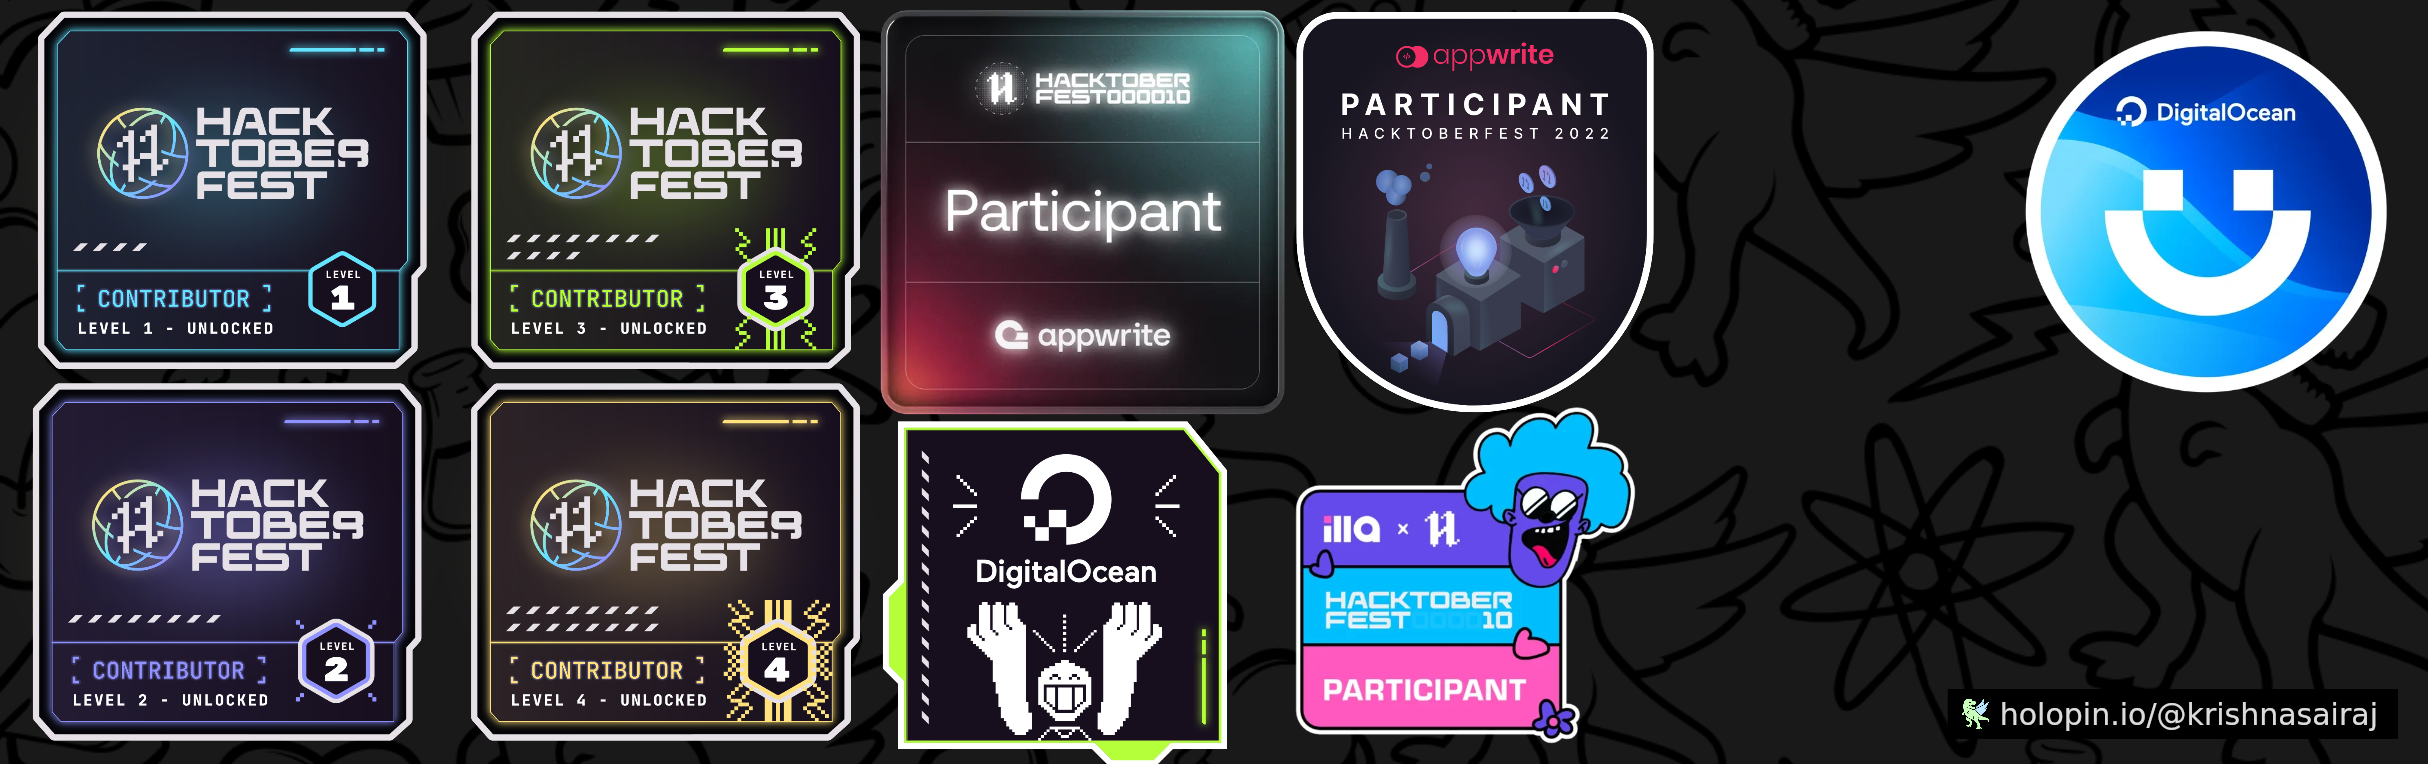 An image of @krishnasairaj's Holopin badges, which is a link to view their full Holopin profile